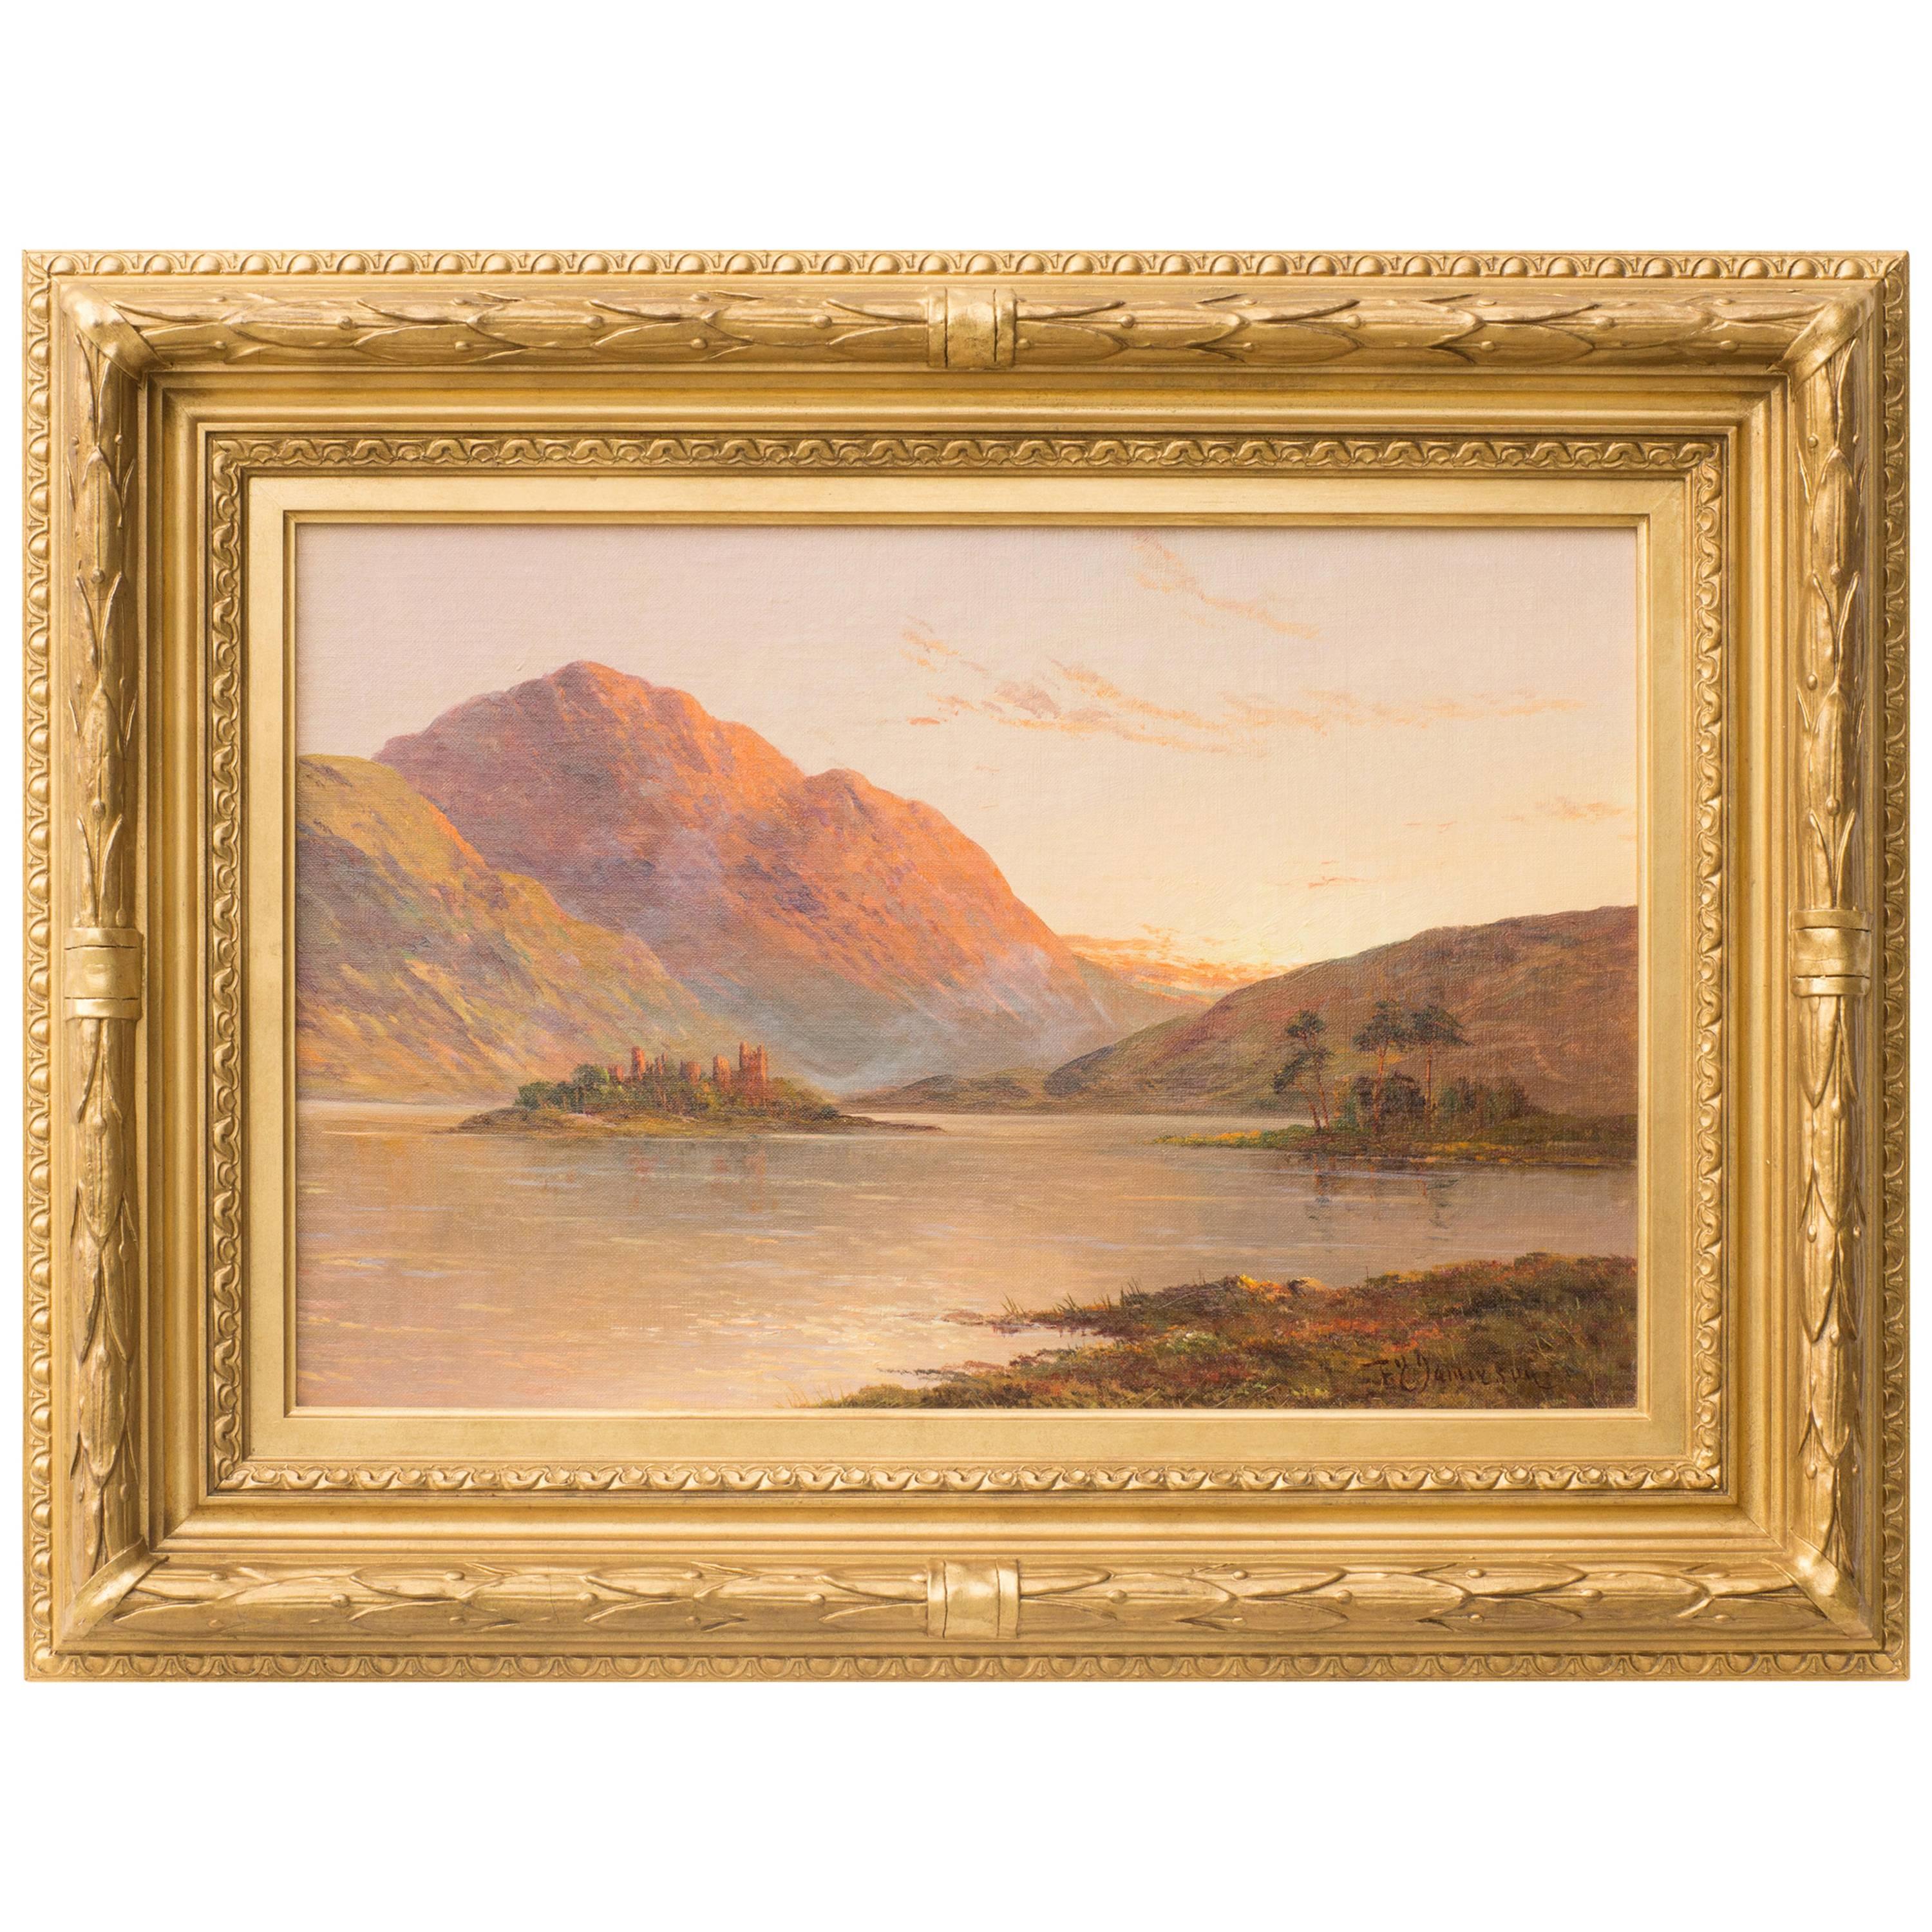 Loch Awe, Scotland, Original Oil on Canvas Painting For Sale